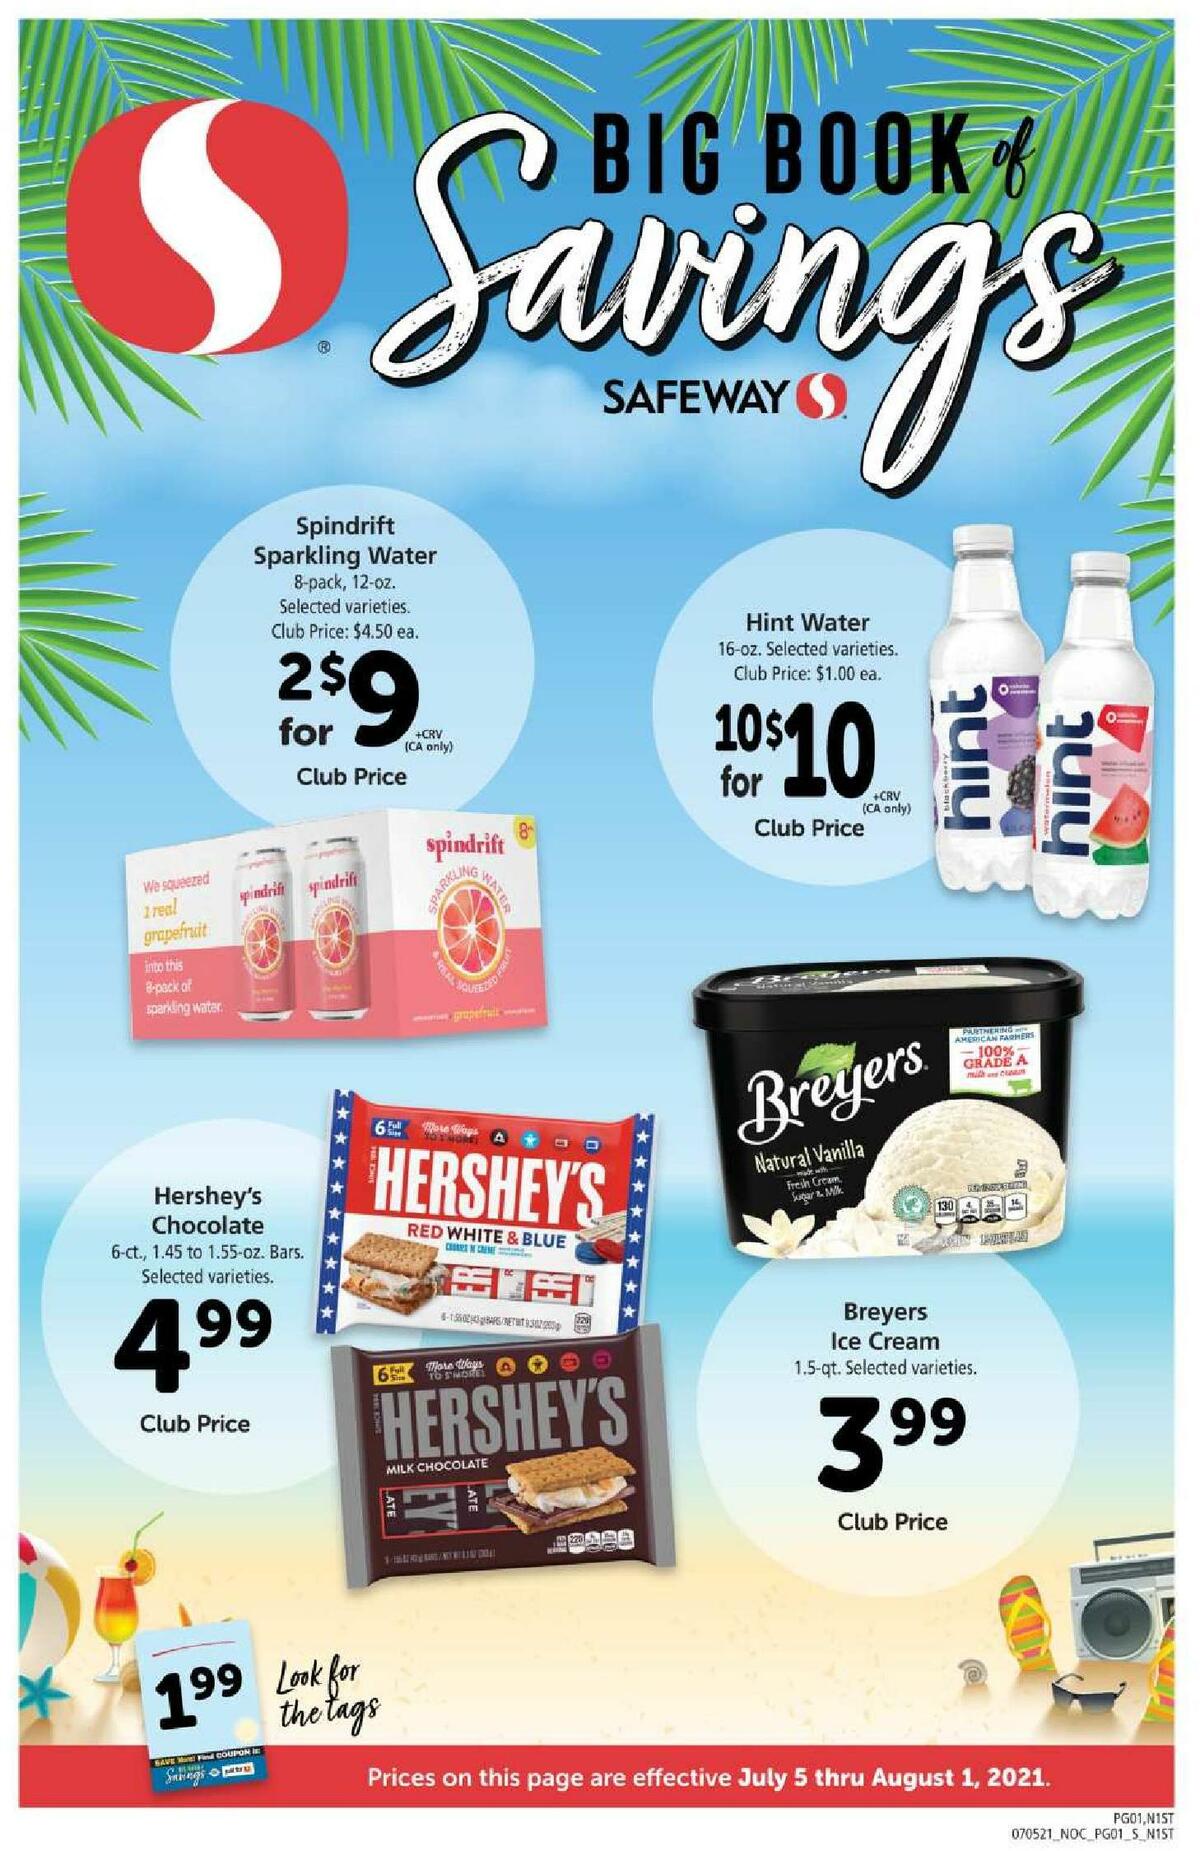 Safeway Big Book of Savings Weekly Ad from July 5